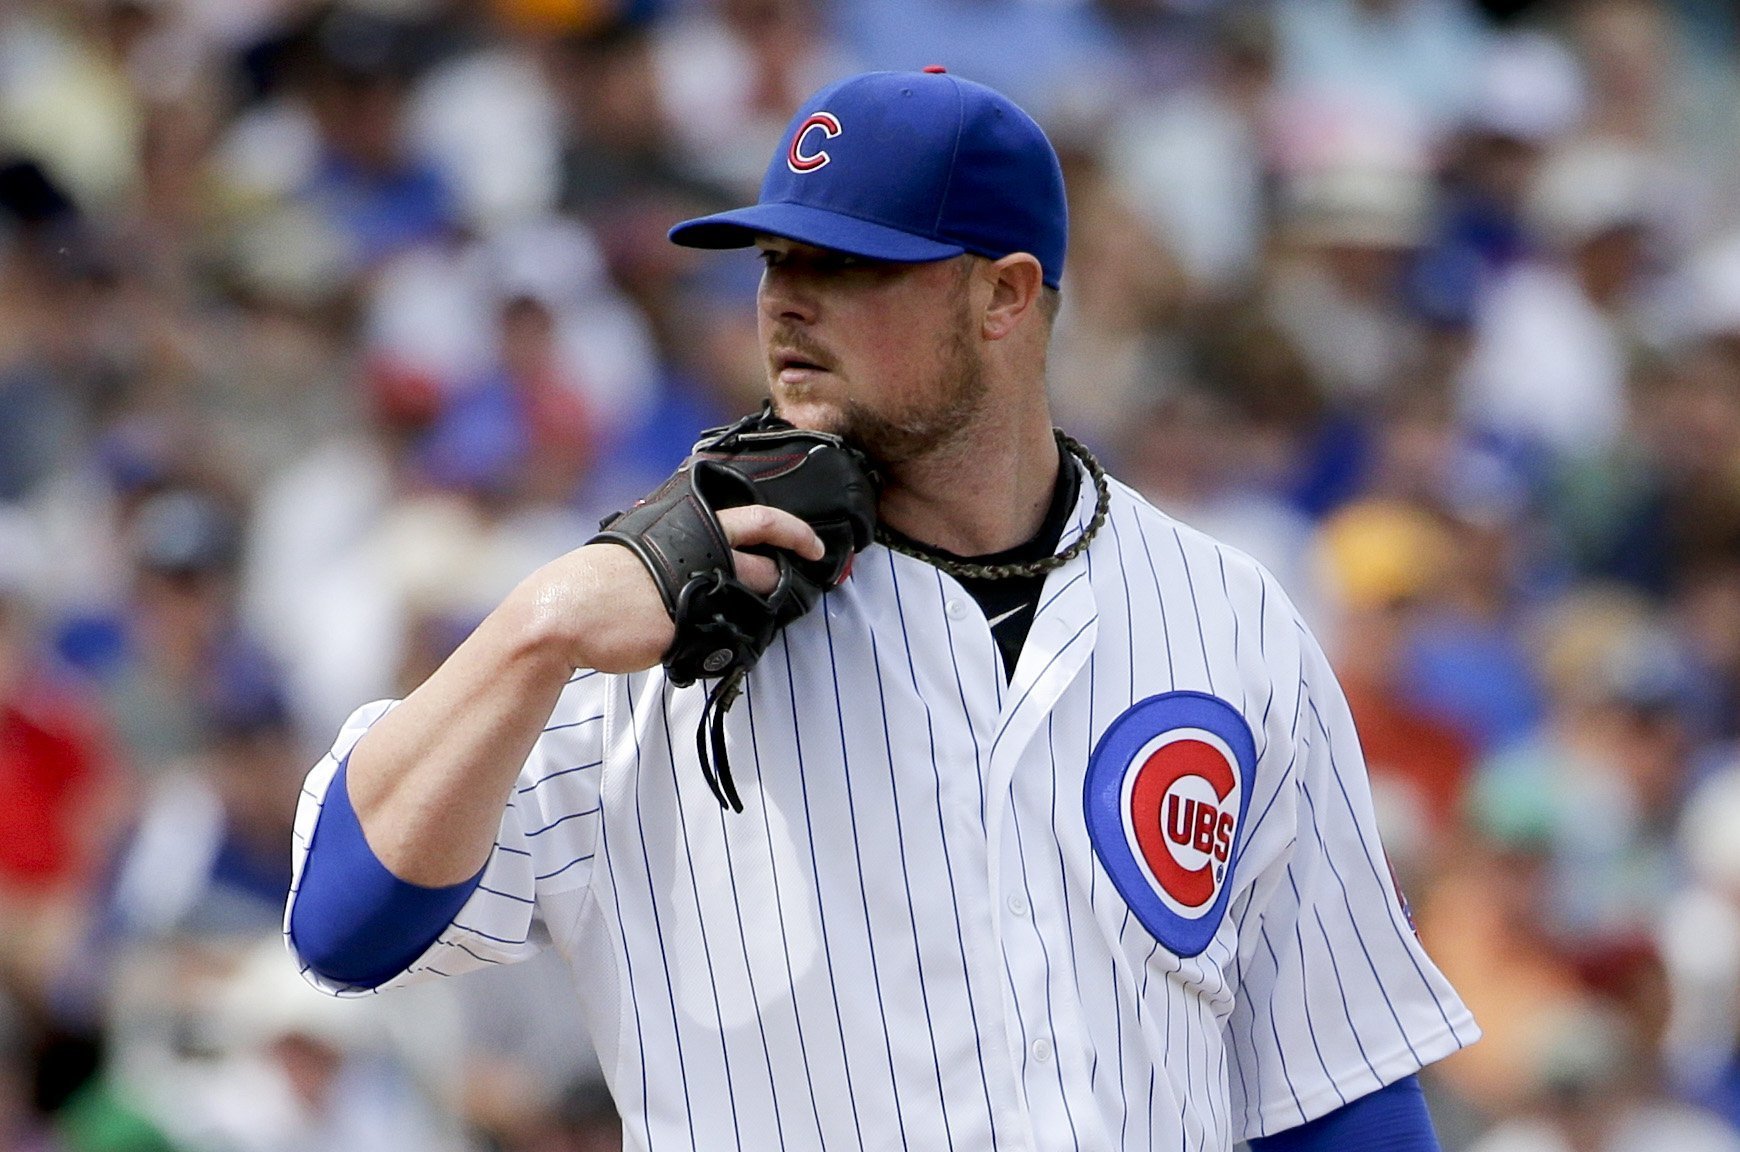 Nightengale: Jon Lester Hopes to End Cubs’ 108-Year World Series ‘Curse’